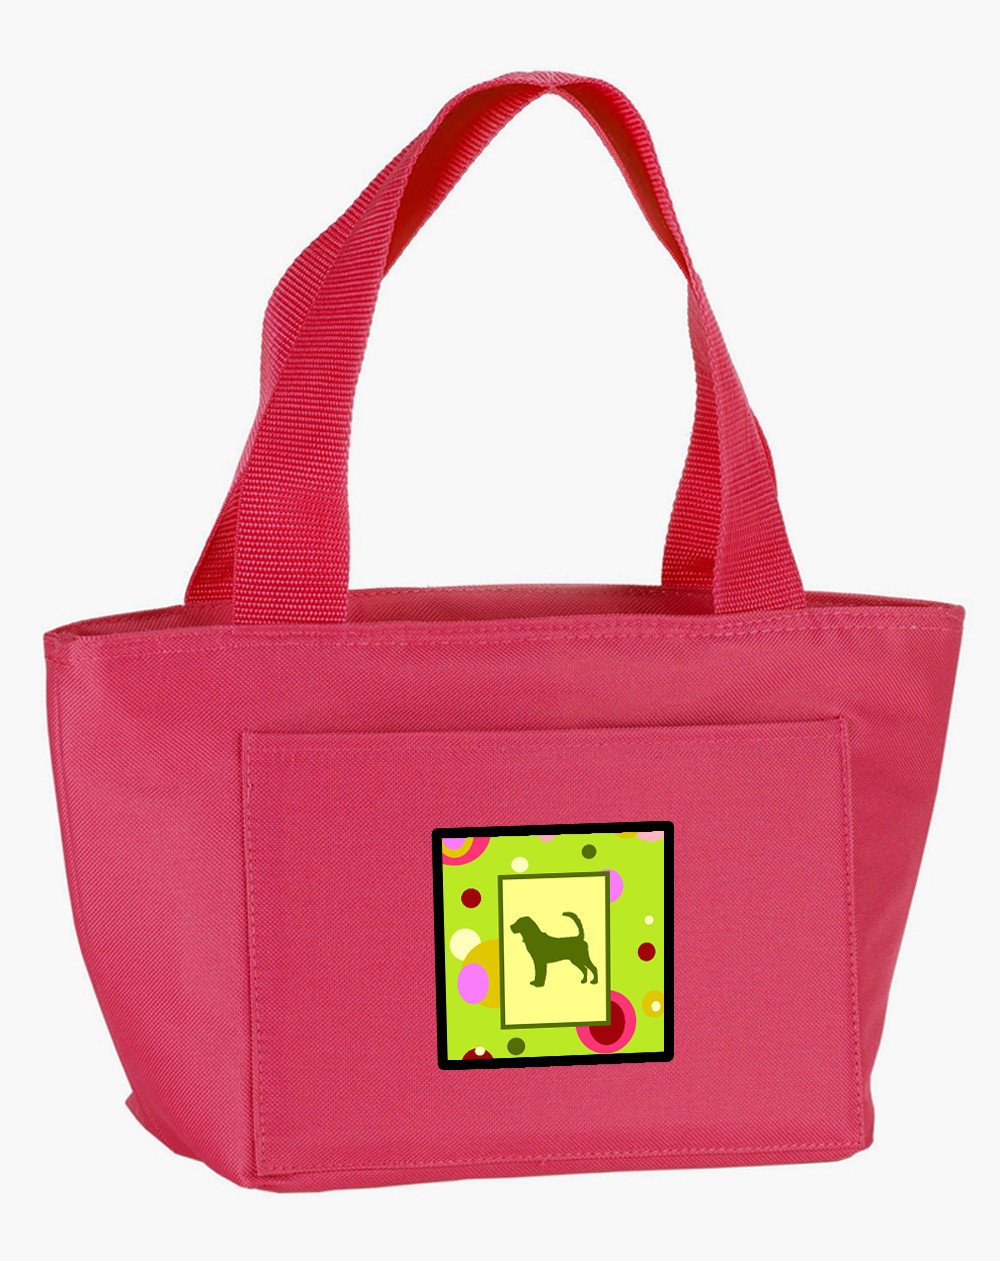 Lime Green Dots Bloodhound Lunch Bag CK1014PK-8808 by Caroline's Treasures